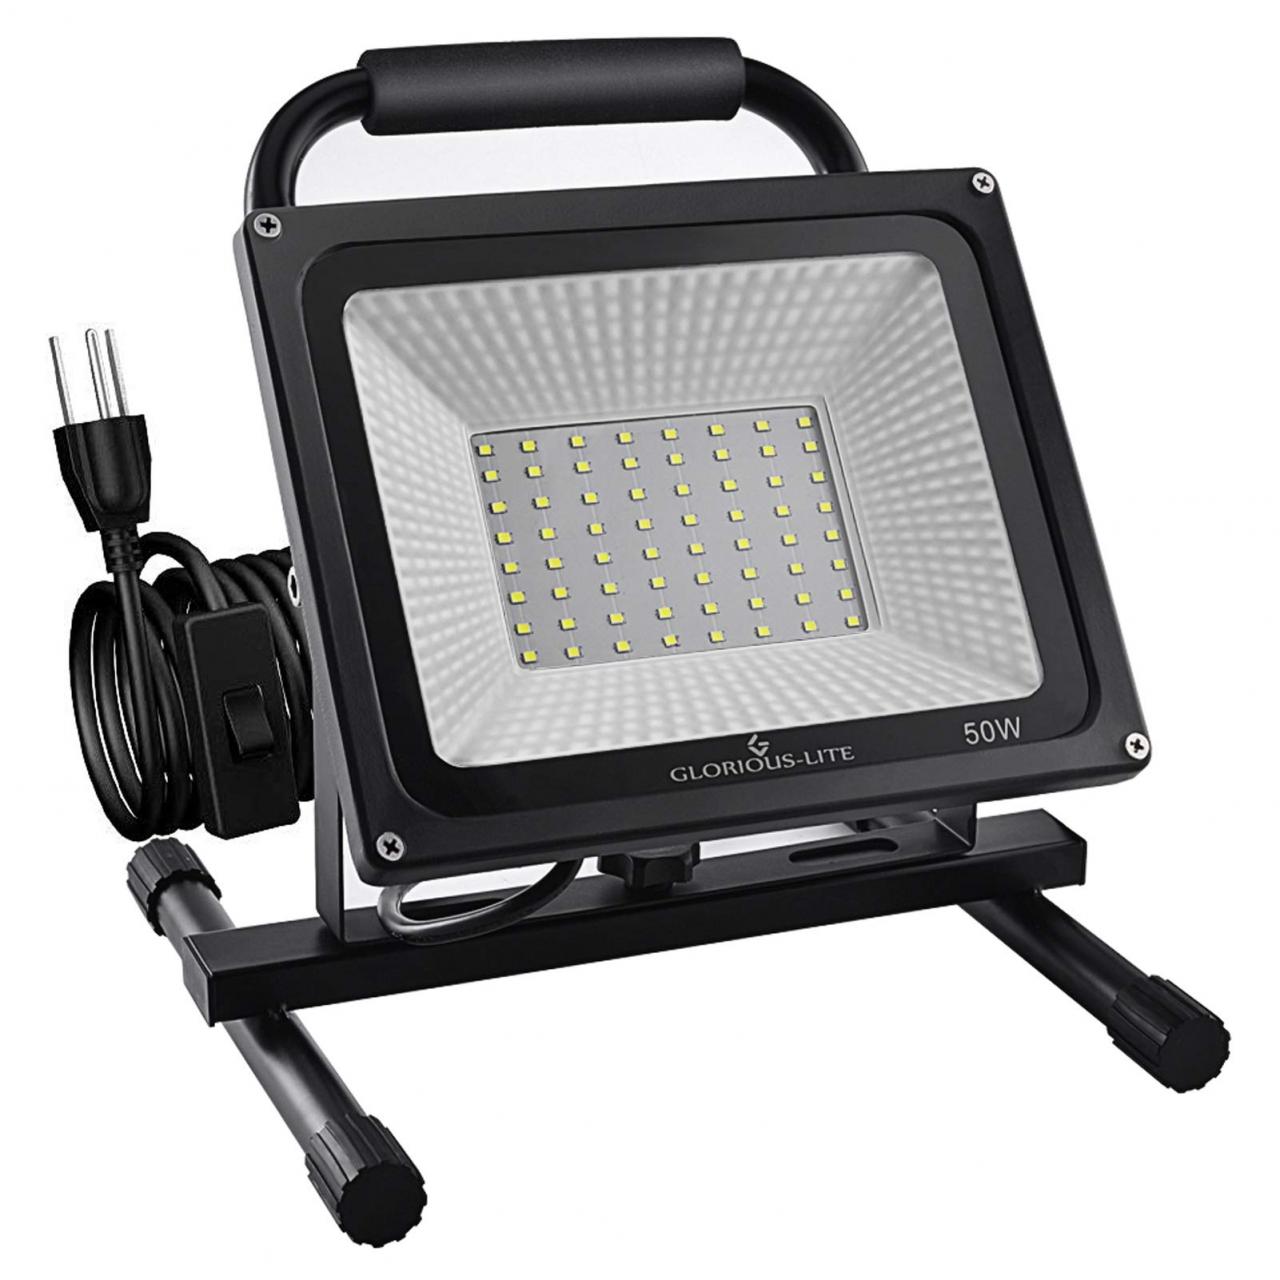 GLORIOUS-LITE 50W LED Work Light, 5000LM LED Flood Lights, 400W Equivalent,  IP66 Waterproof, 16ft 5m Cord with Plug, 6500K, Adjustable Working Lights  for Workshop Garage, Construction Site- Buy Online in Antigua and